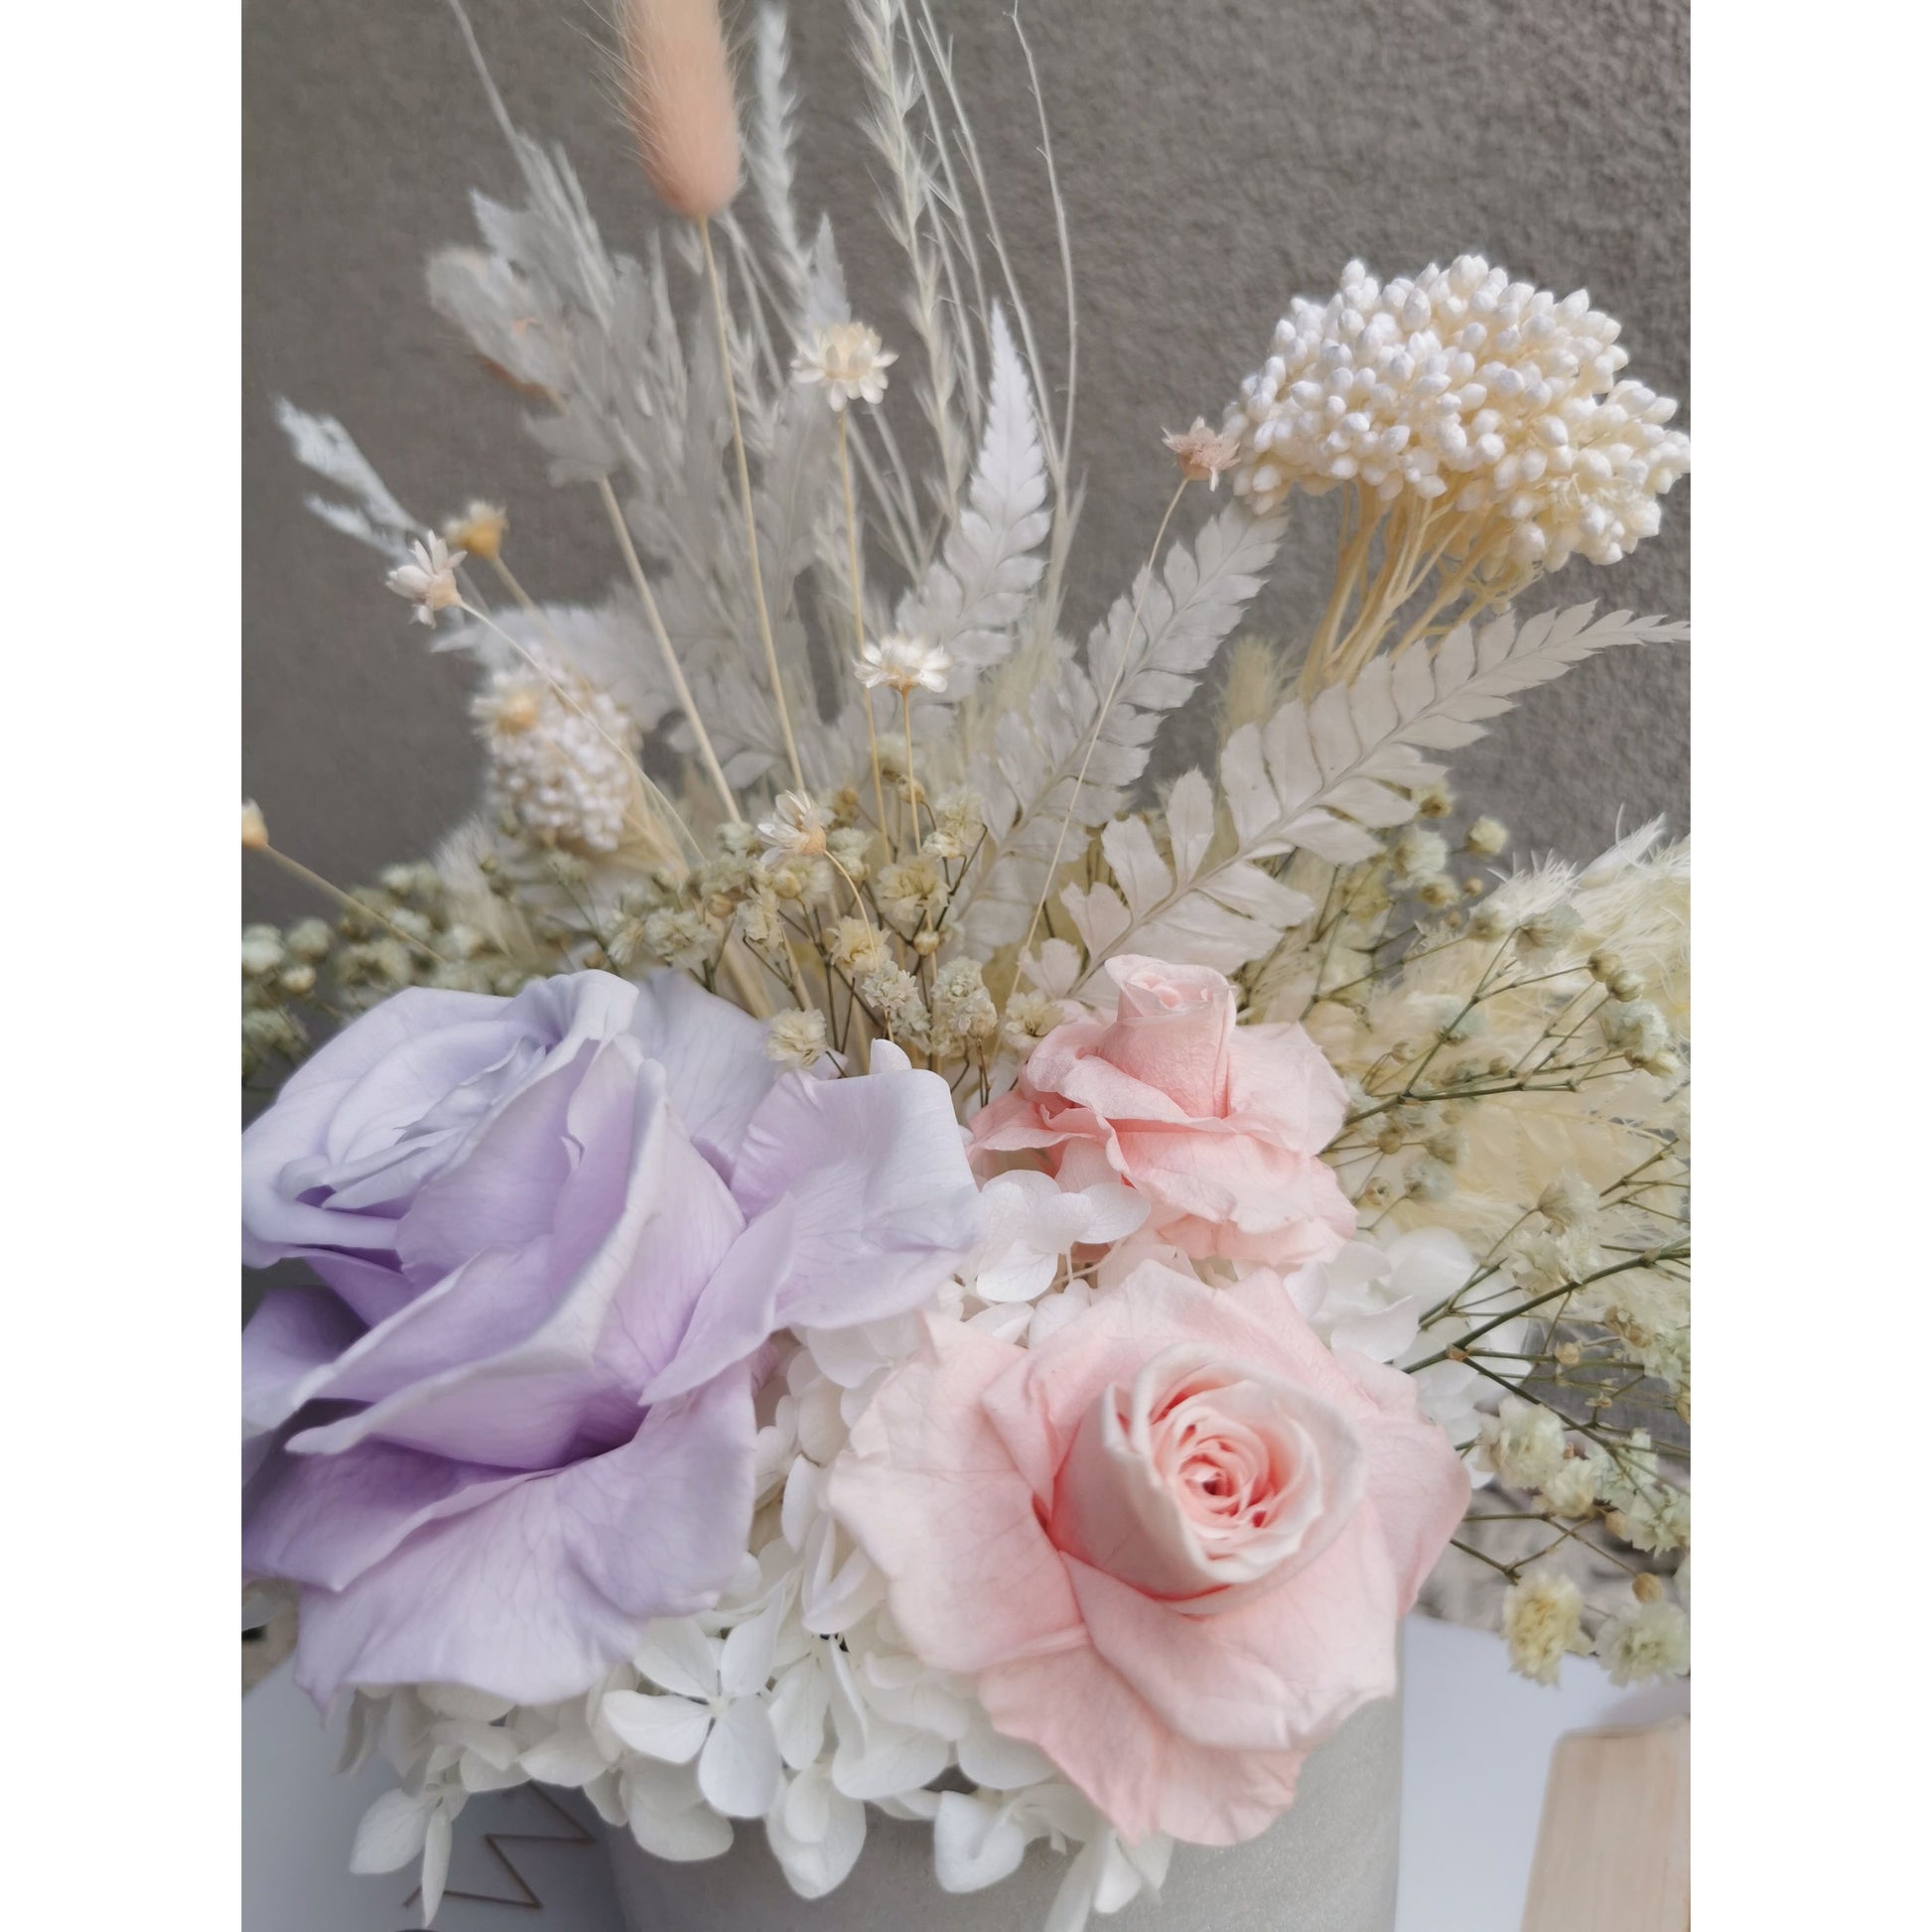 Dried & Preserved flower arrangement in pastel pink, purple & white flowers and set in to a light grey cement pot. Photo shows a close up look of the flowers